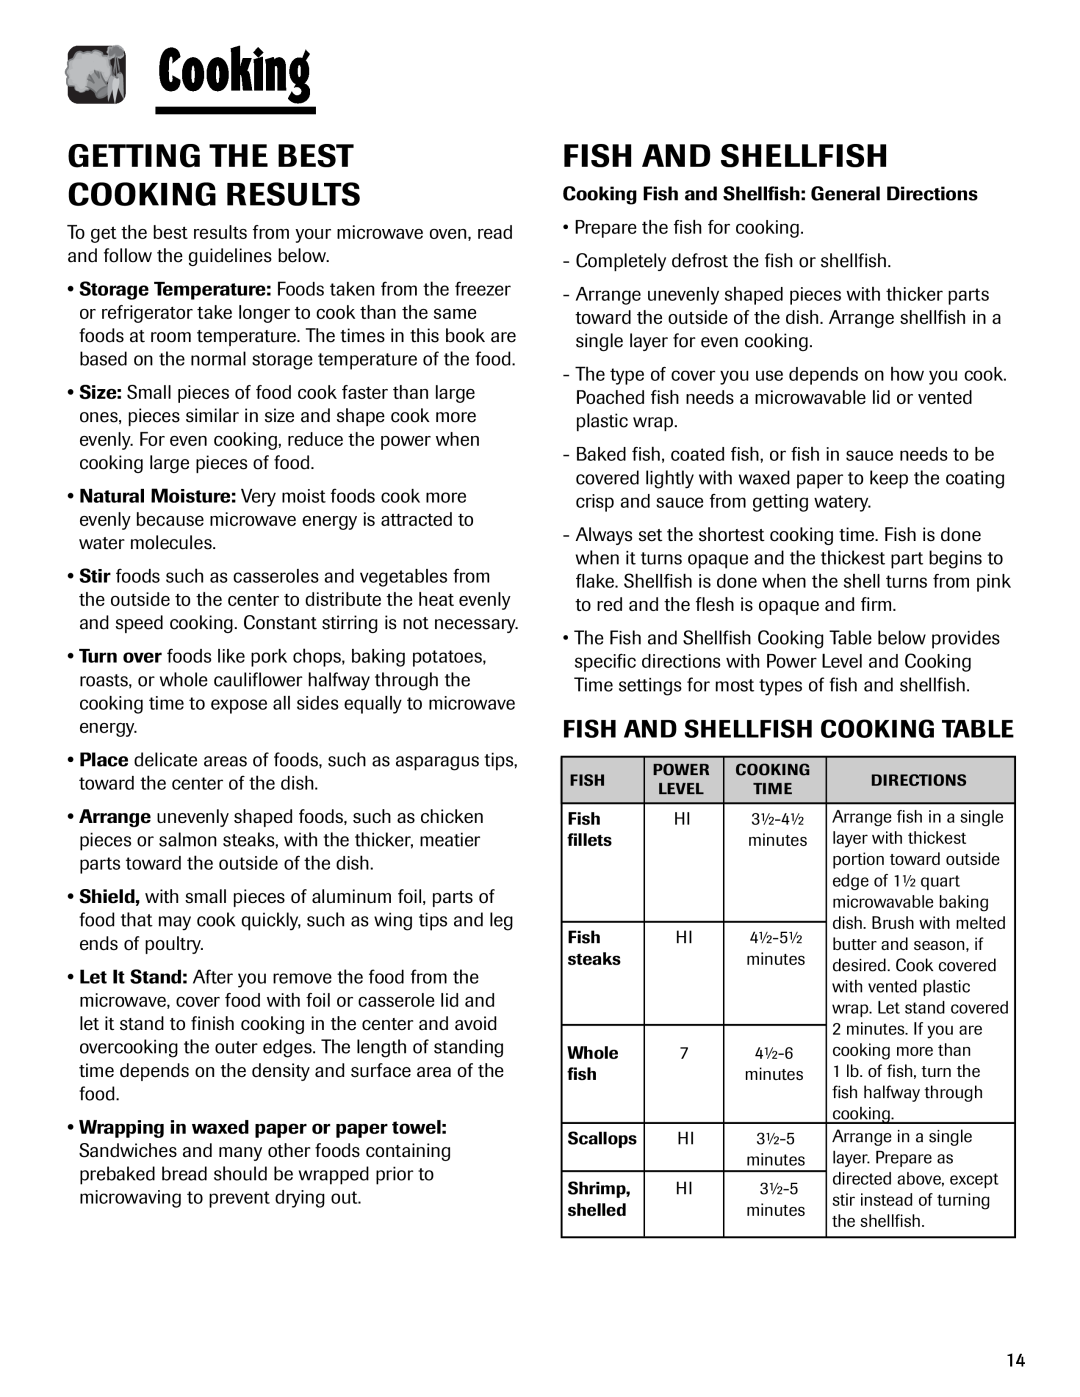 Maytag MMV1153AA important safety instructions Getting The Best Cooking Results, Fish And Shellfish Cooking Table 